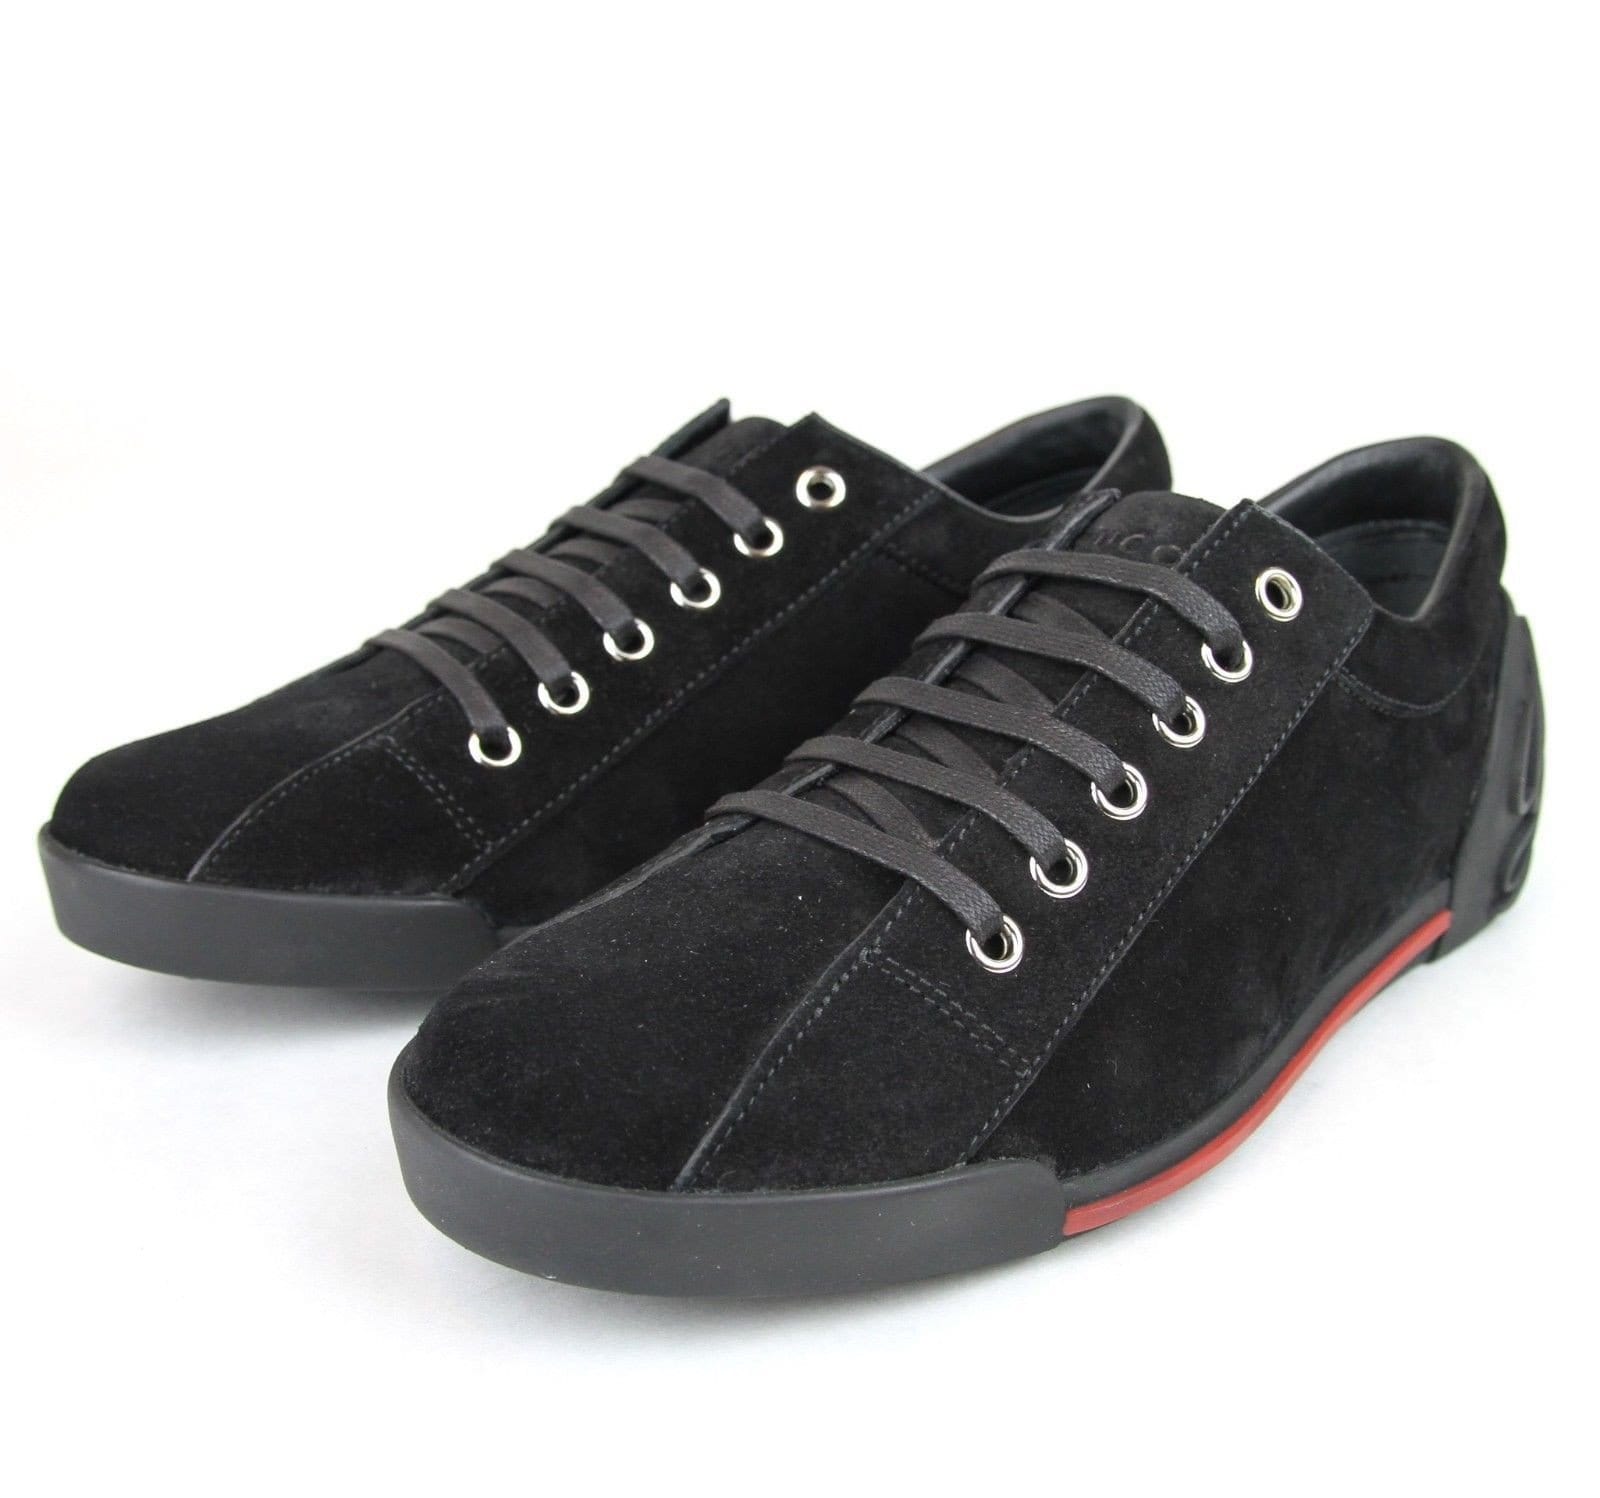 Gucci Sneakers - Gucci Women Black Sneakers Suede Trainer